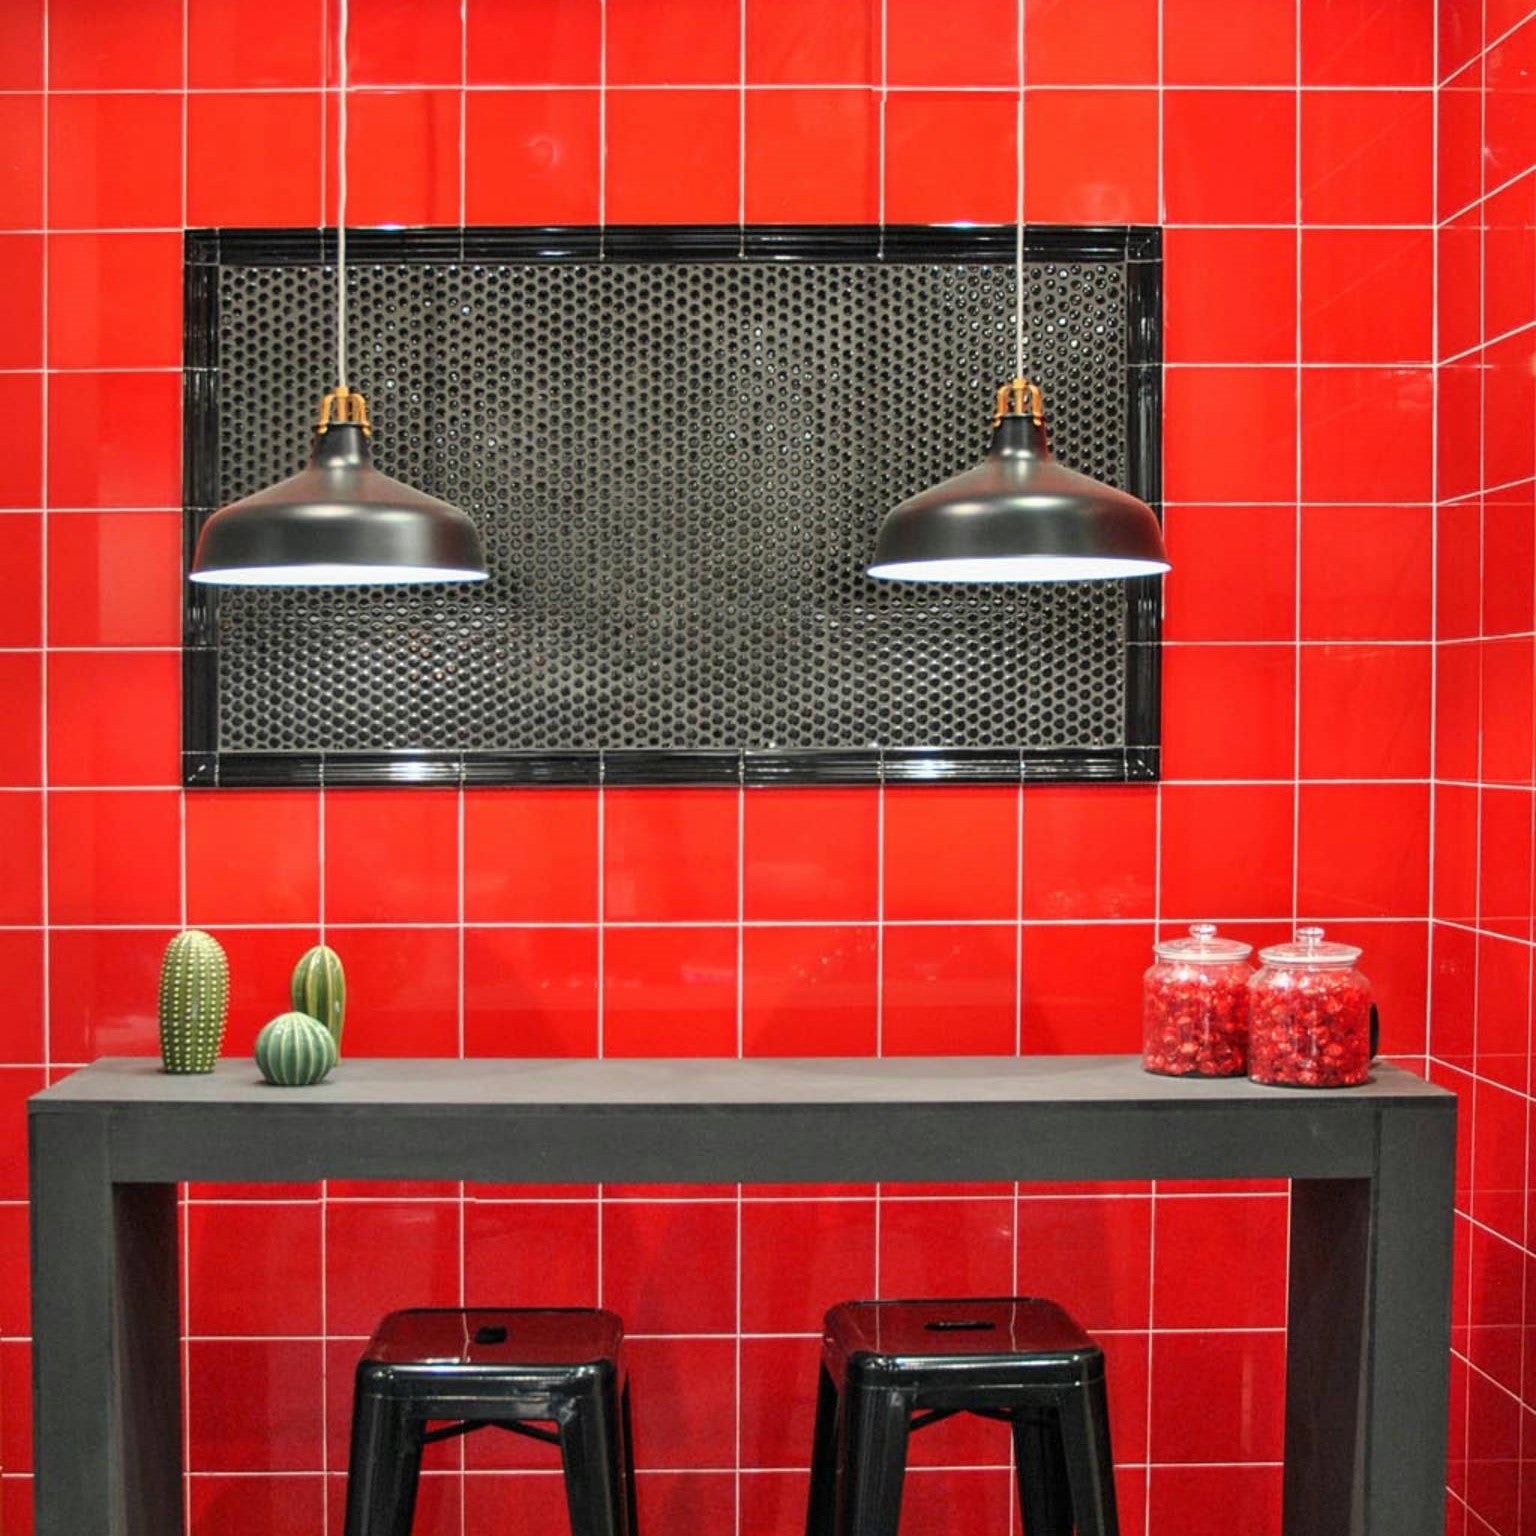 Modern bathroom vanity against a backdrop of Adex Riviera Ceramic Tiles in strong red, accented with a decorative mosaic border, showcasing the collection's sophisticated multi-tone glaze effect.